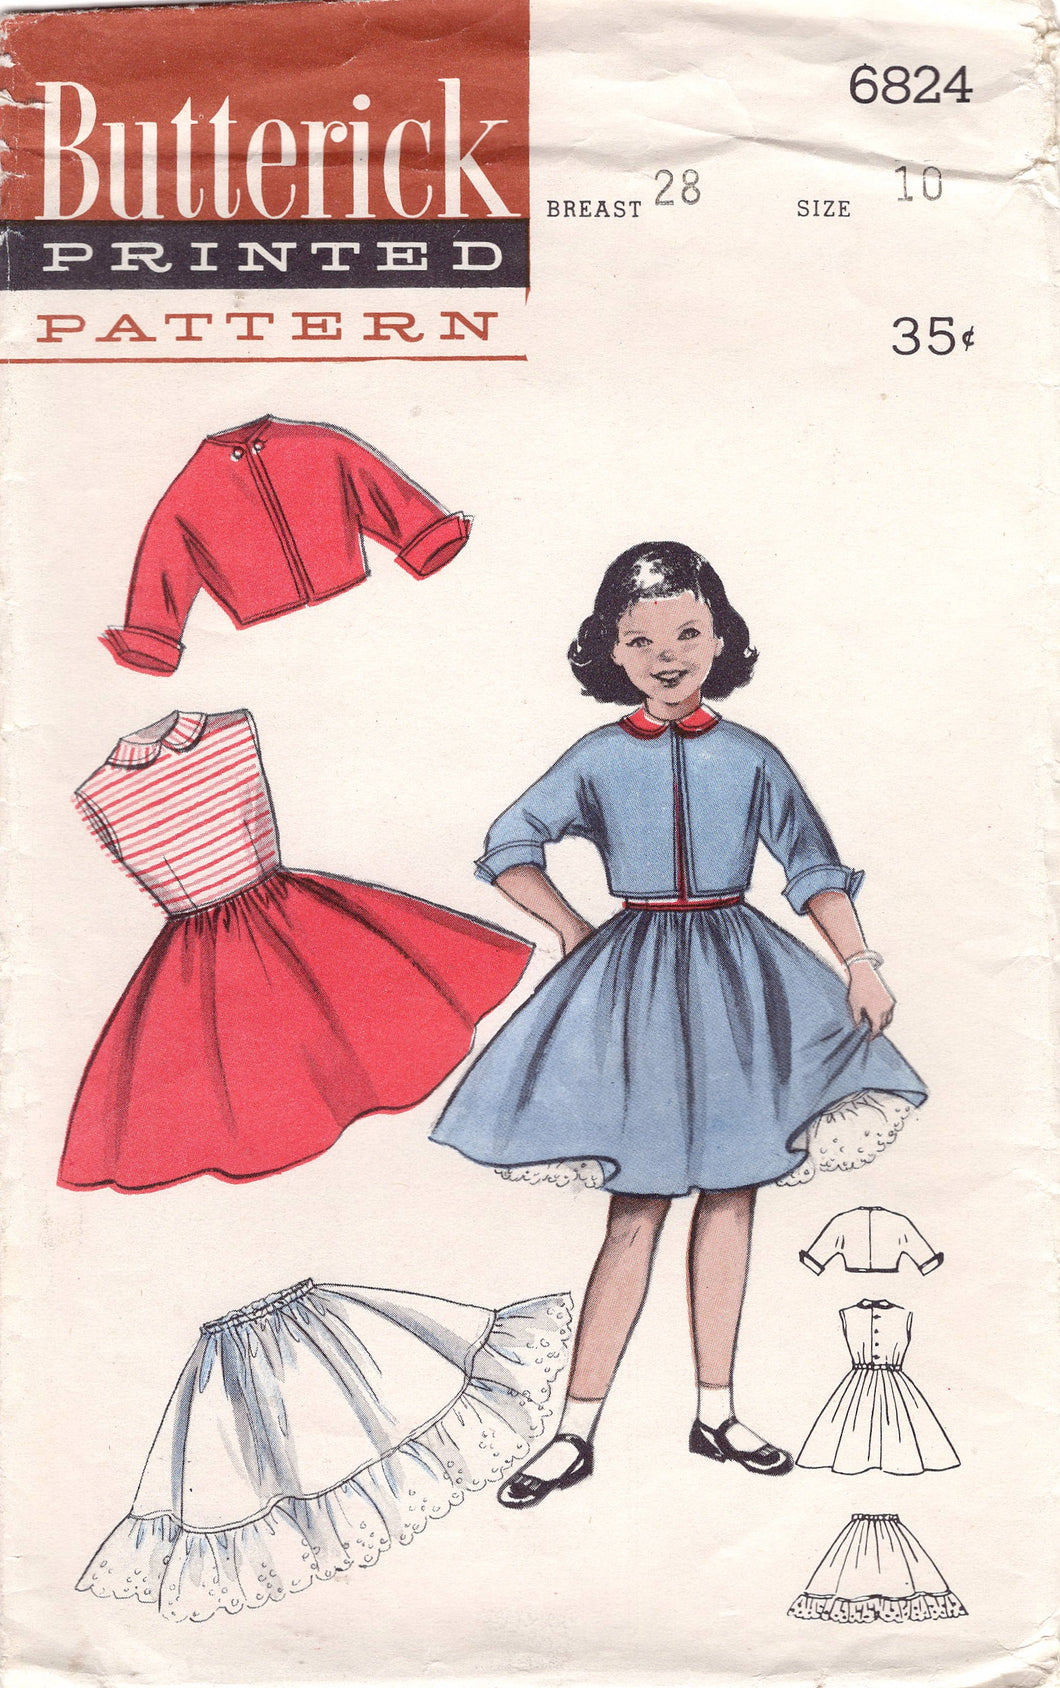 1950's Butterick Girl's Fit and Flare Dress, Petticoat, and Bolero pattern - Size 10 - Breast 28